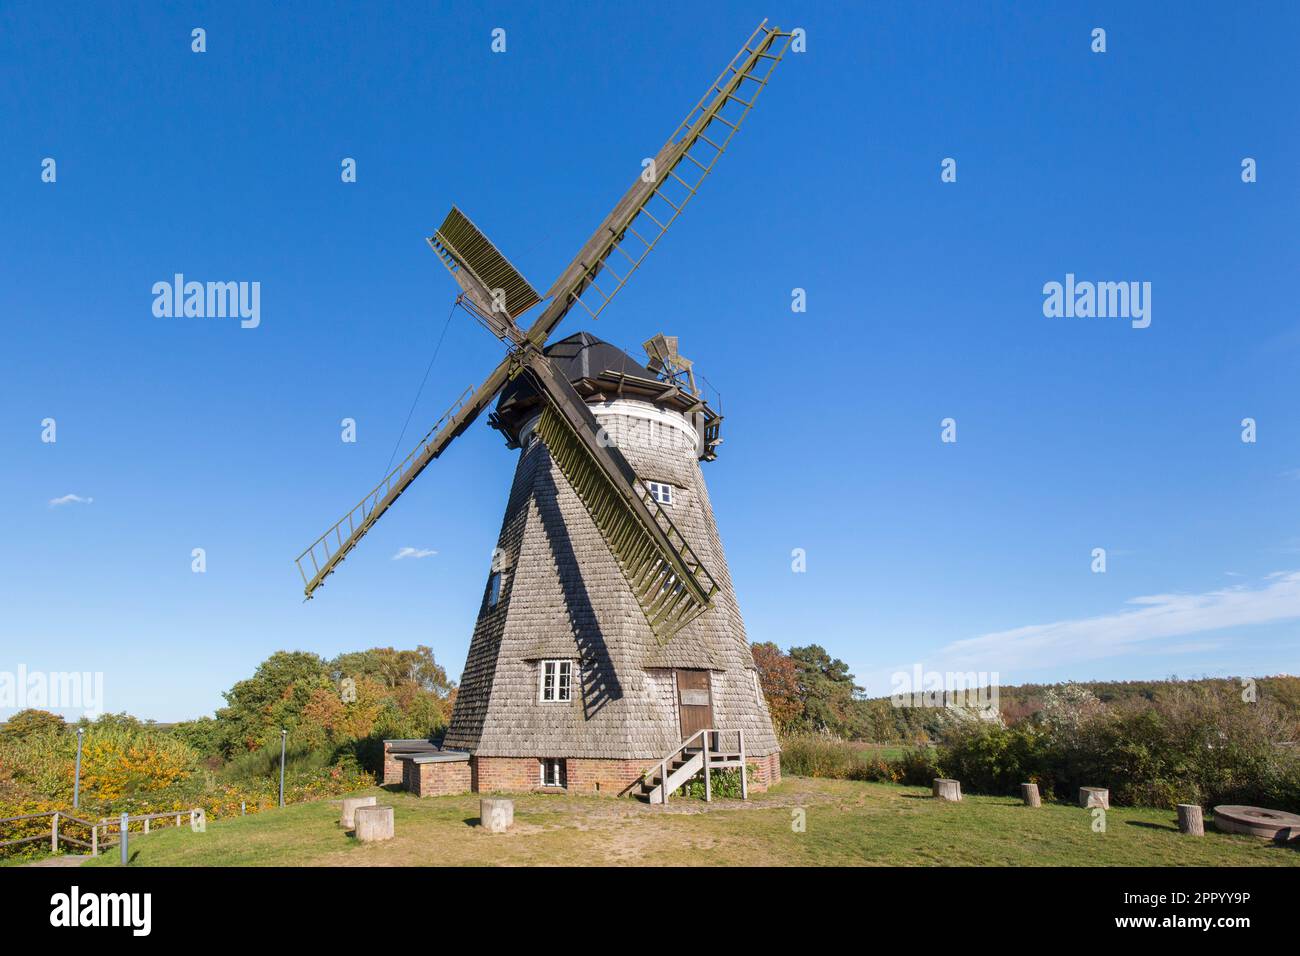 Ground smock mill, Dutch type of windmill at Benz, municipality on the island Usedom, Vorpommern-Greifswald district, Mecklenburg-Vorpommern, Germany Stock Photo